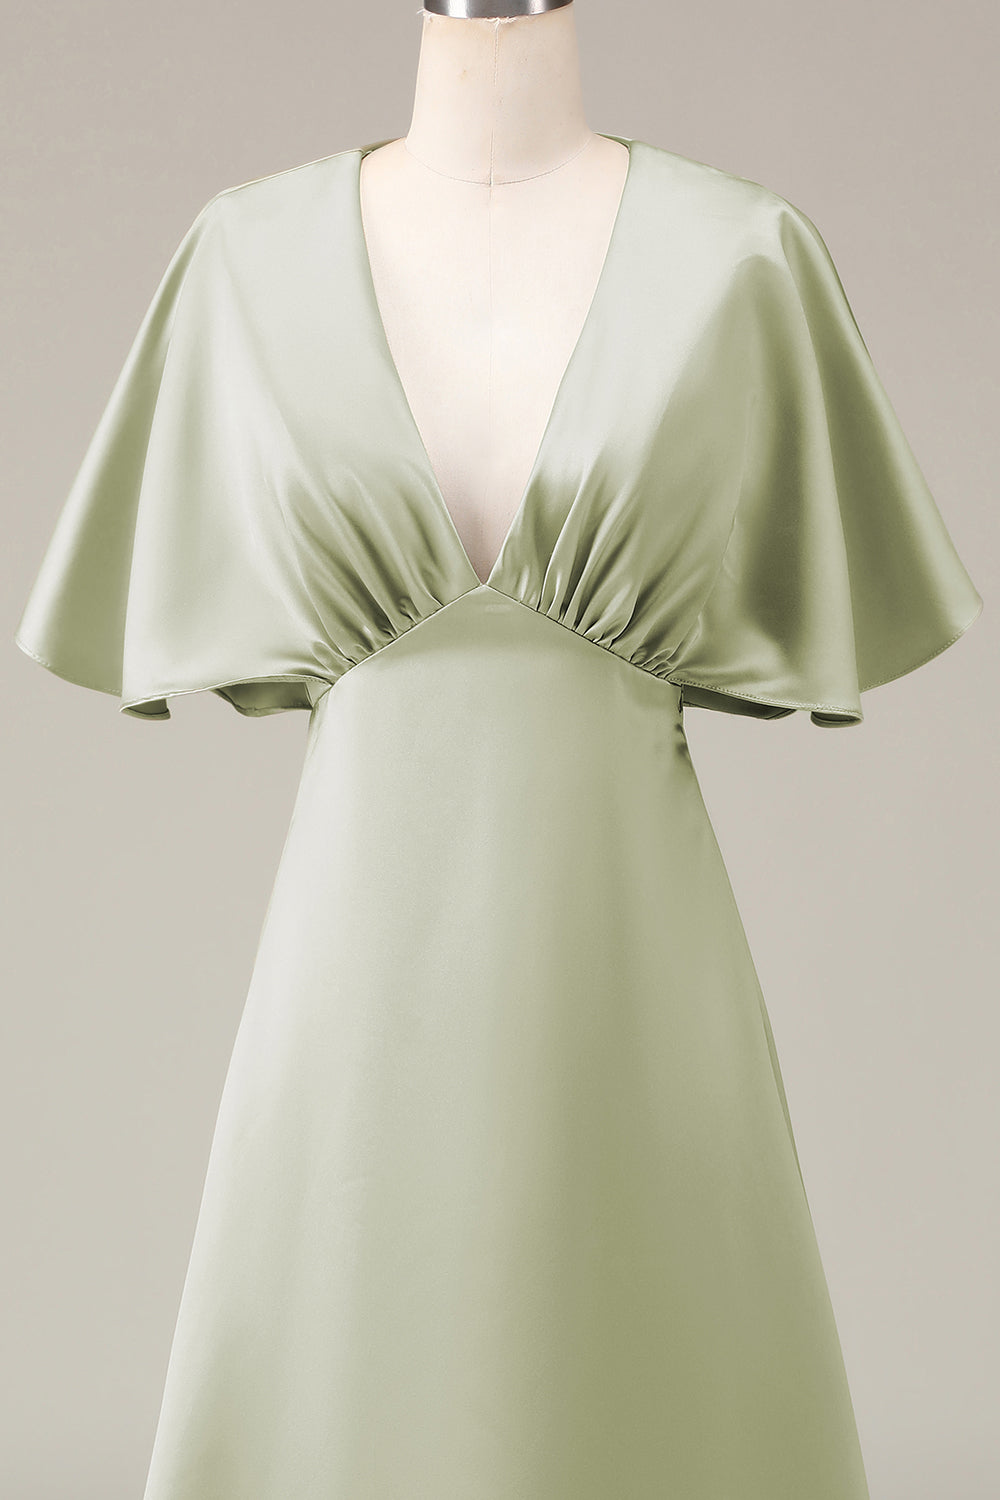 Dusty Sage A-Line V-Neck Satin Bridesmaid Dress With Short Sleeves